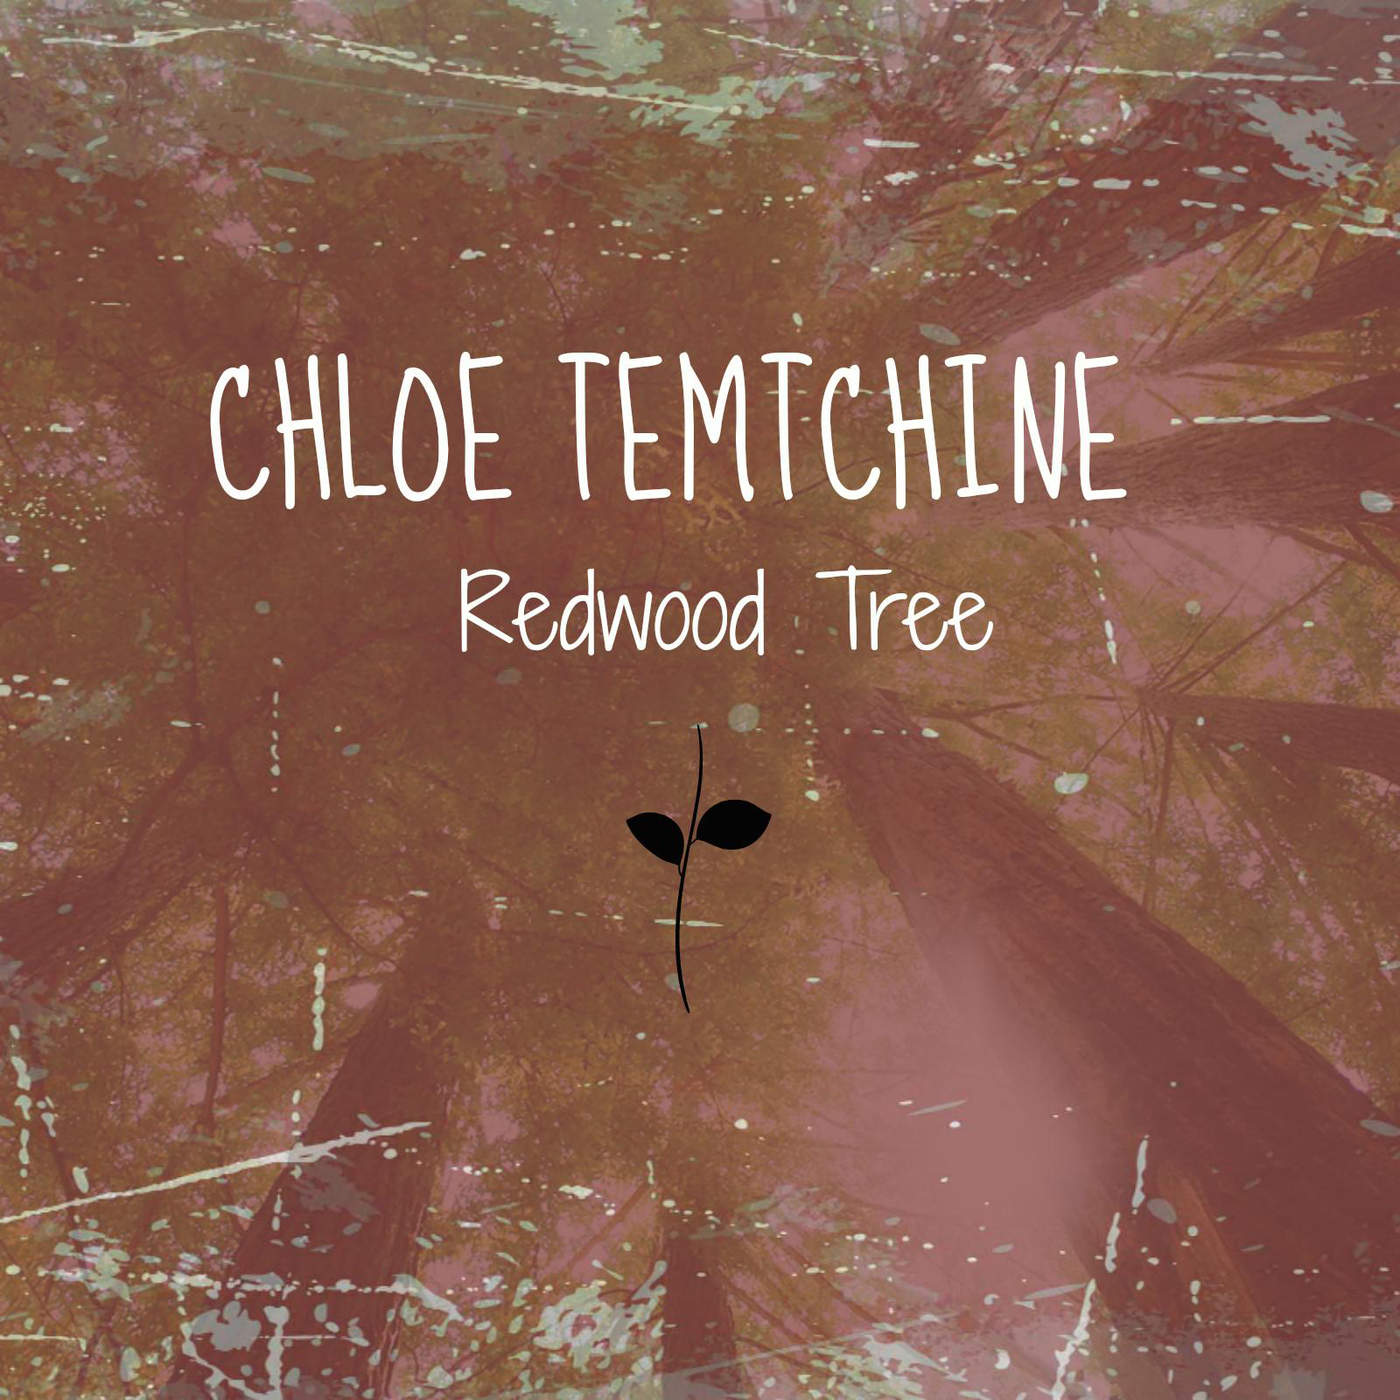 Art for Redwood Tree by Chloe Temtchine